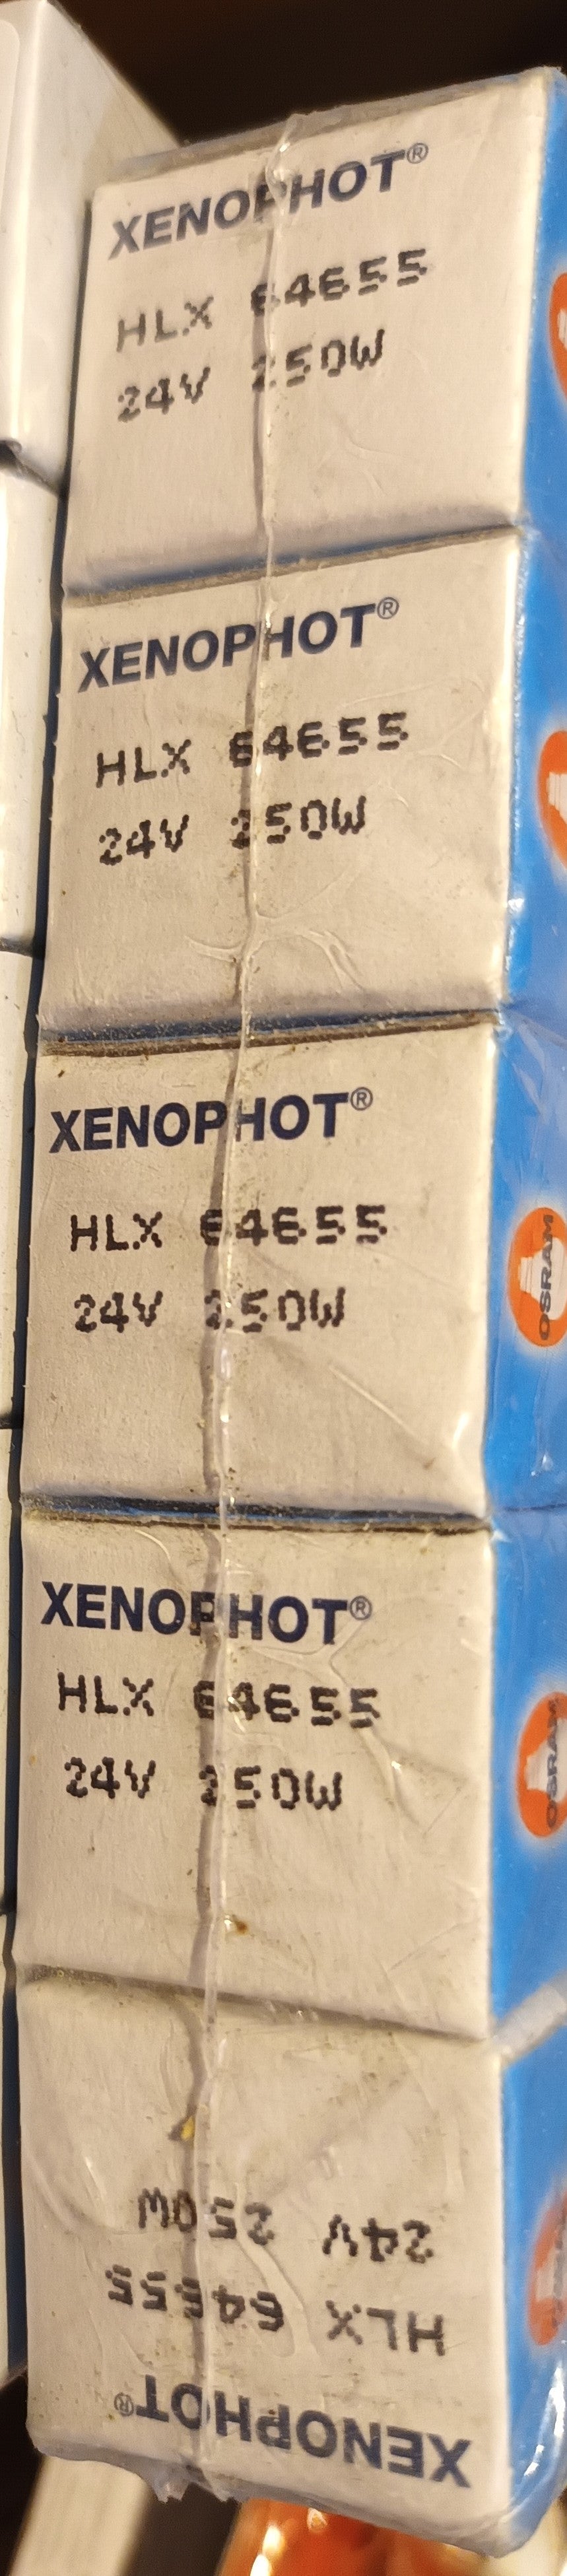 A1/223 EHJ Xenophot HLX 64655  Low-voltage 24V halogen lamps 250w without reflector by Osram